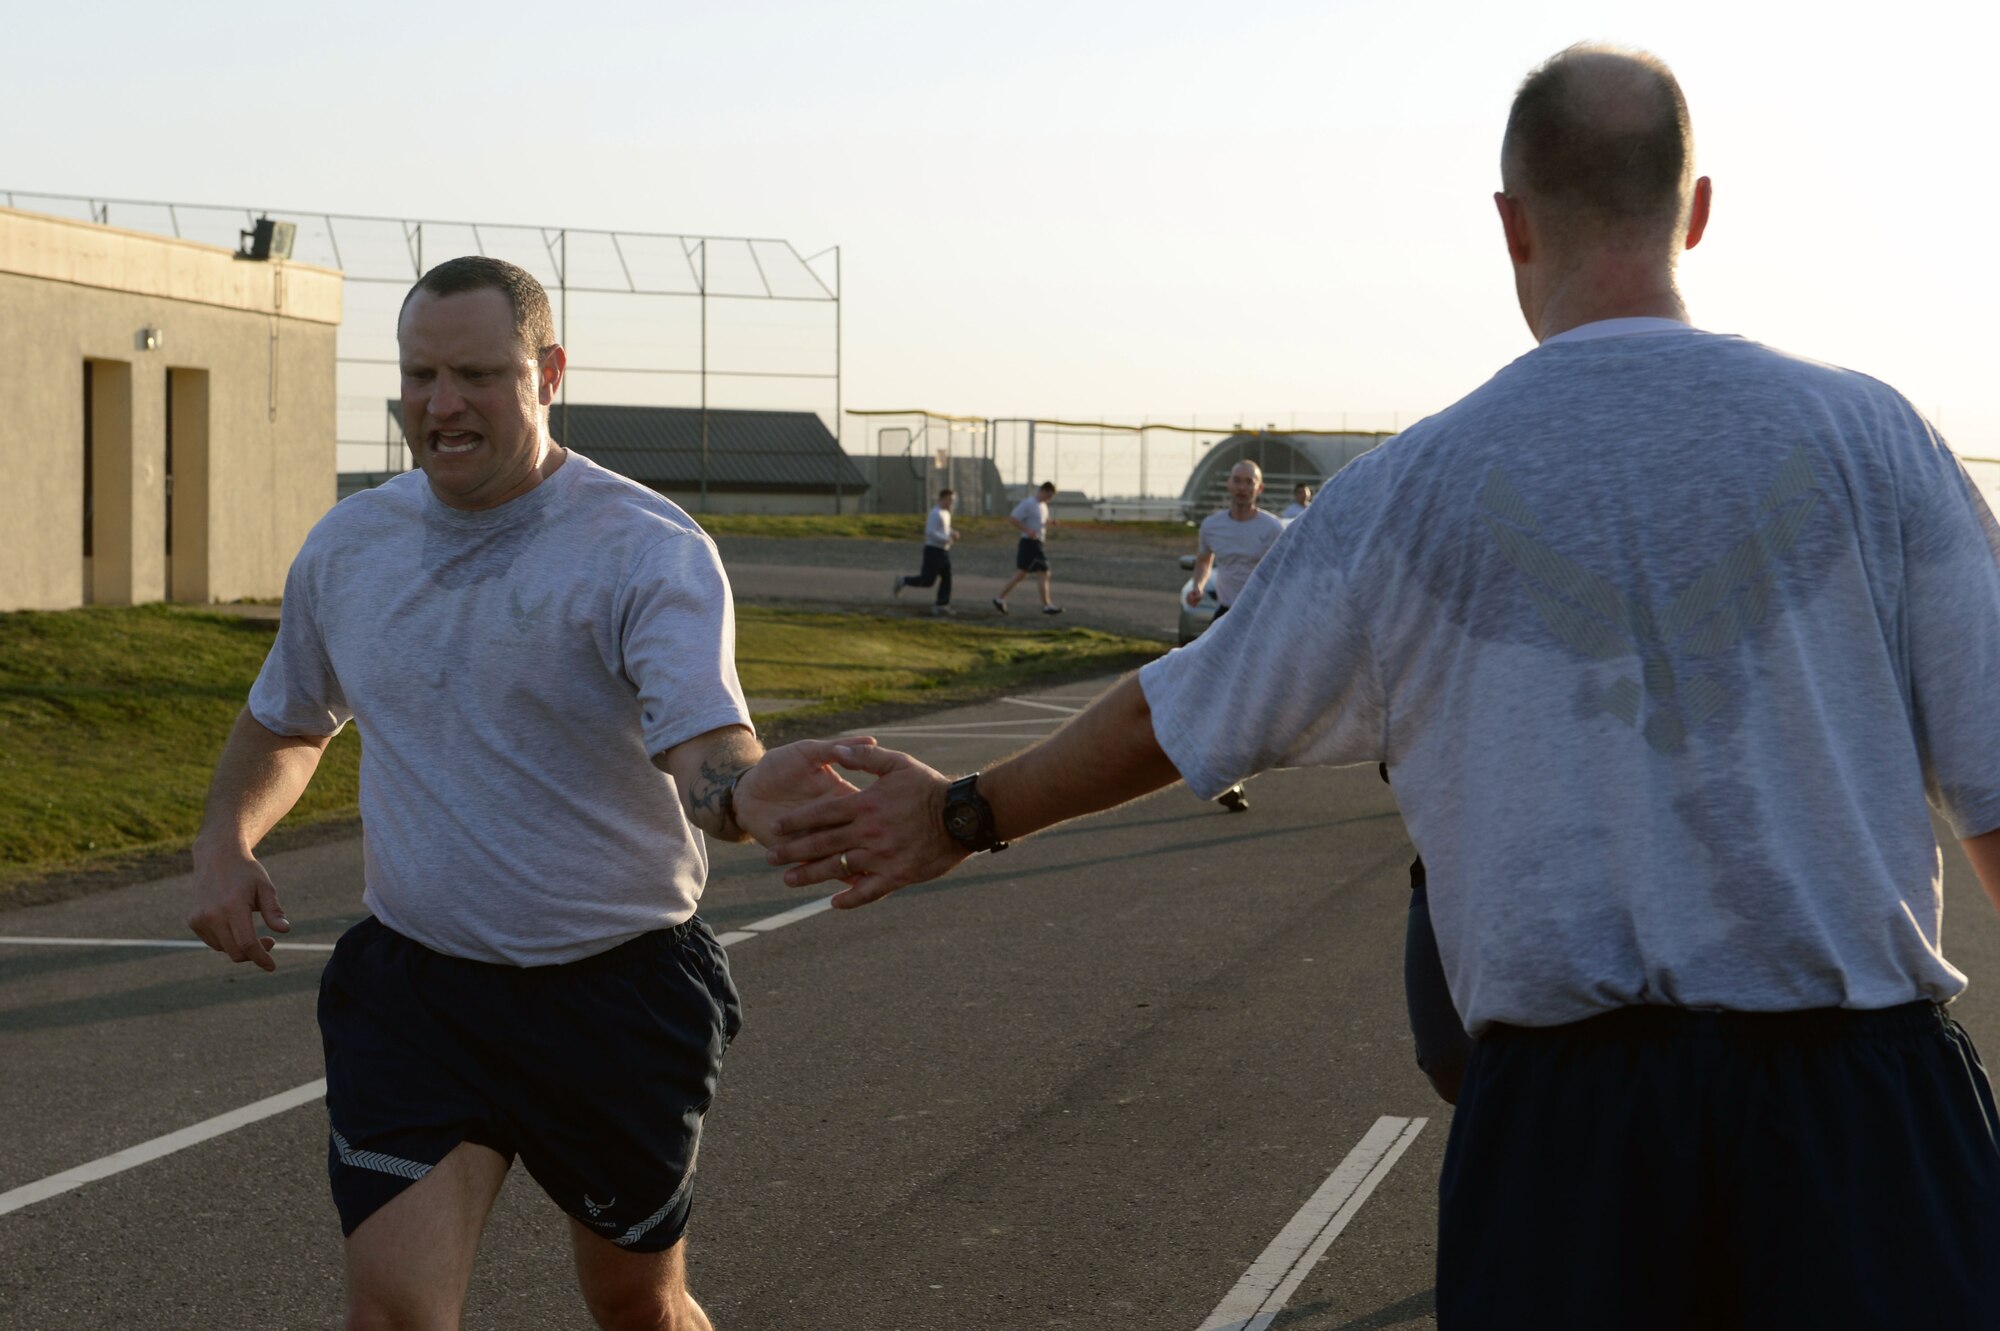 An Airman encourages his peer during a wing-wide 5K fun run for Sexual Assault Awareness Month at Spangdahlem Air Base, Germany, April 2, 2014. Event coordinators invited all base members to participate in the free event to raise awareness on sexual assault. (U.S. Air Force photo by Senior Airman Alexis Siekert/Released)